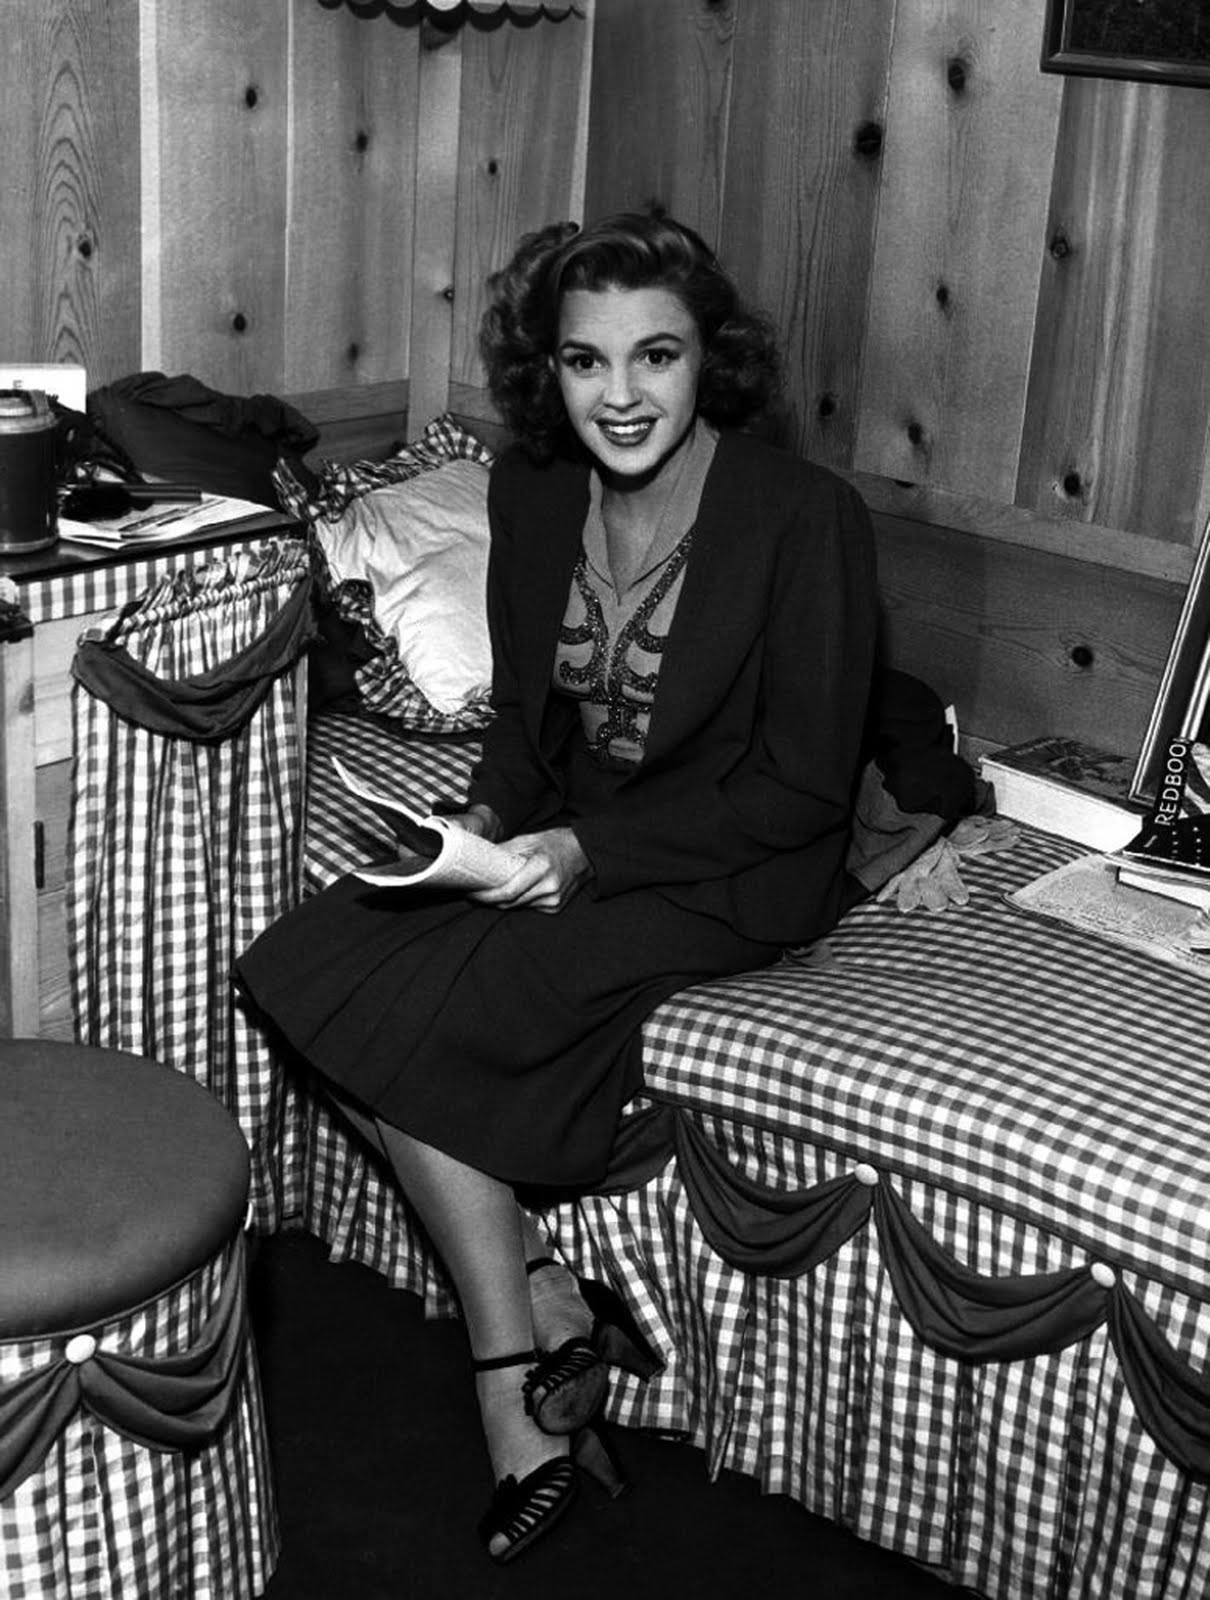 Judy Garland (June 10, 1922 - June 22, 1969) was an American actress and si...